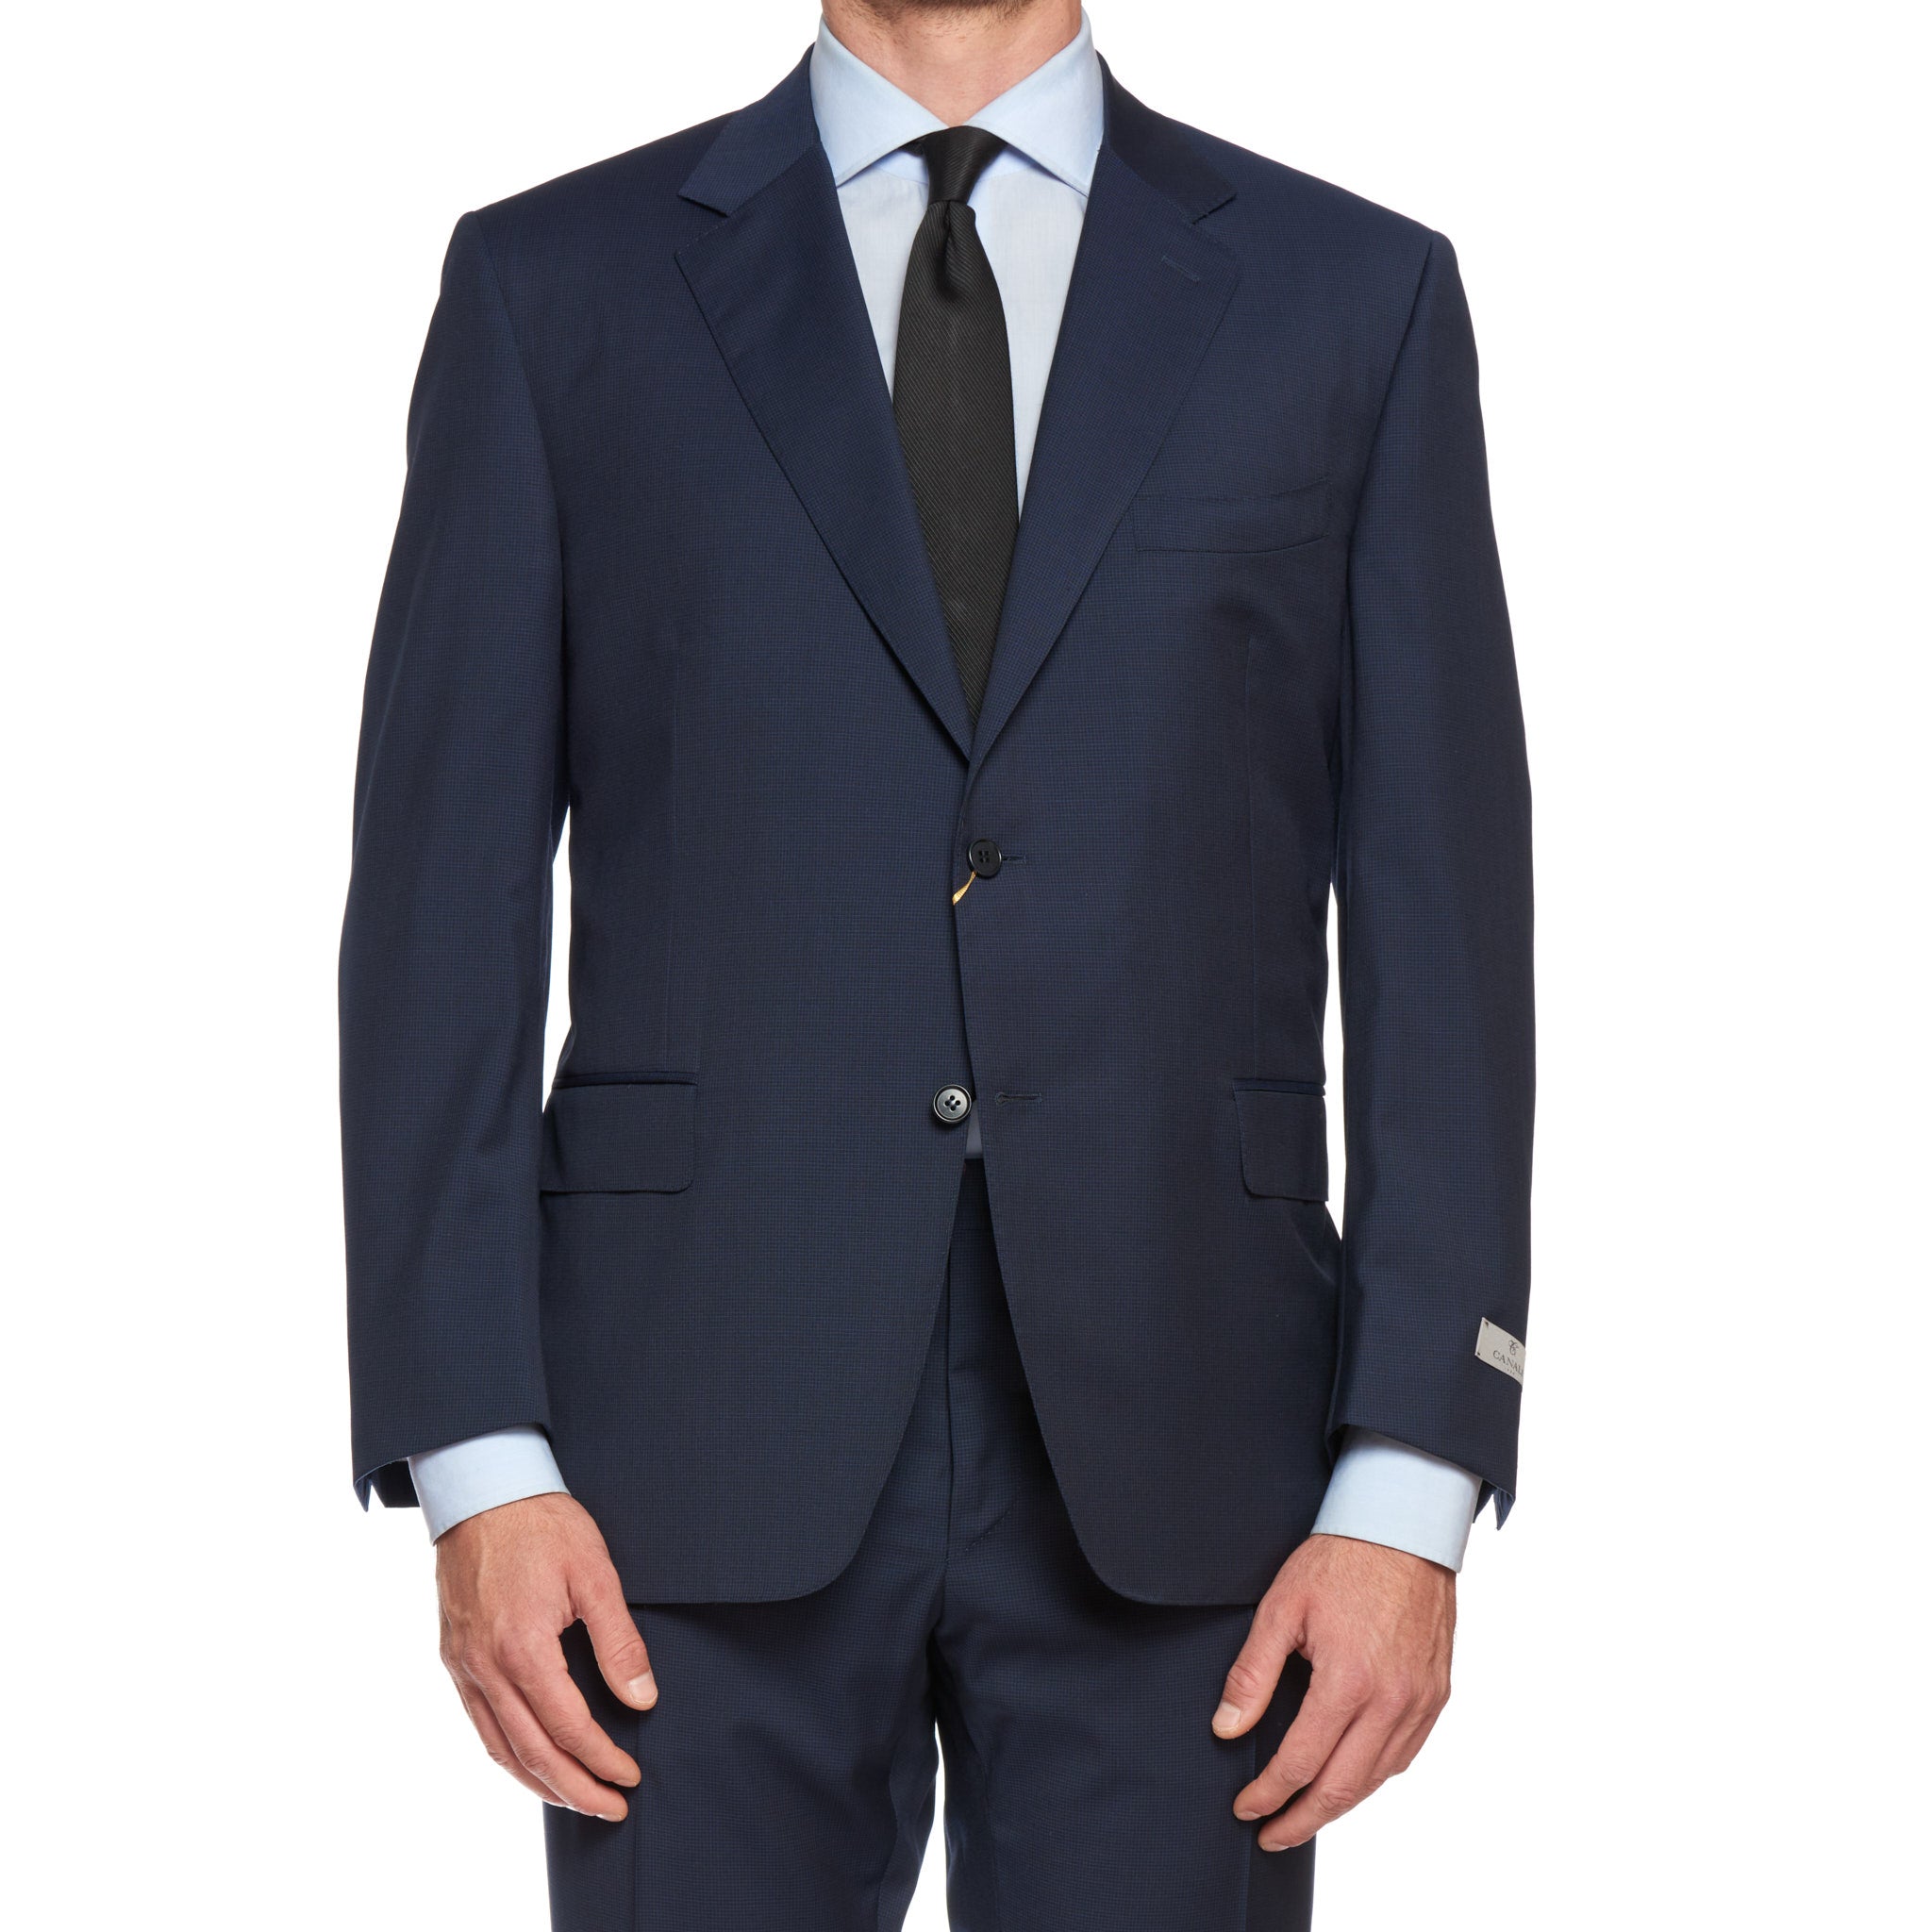 CANALI 1934 Navy Blue Patterned Wool Suit EU 58 NEW US 48 Current Model C4 Short Cut CANALI